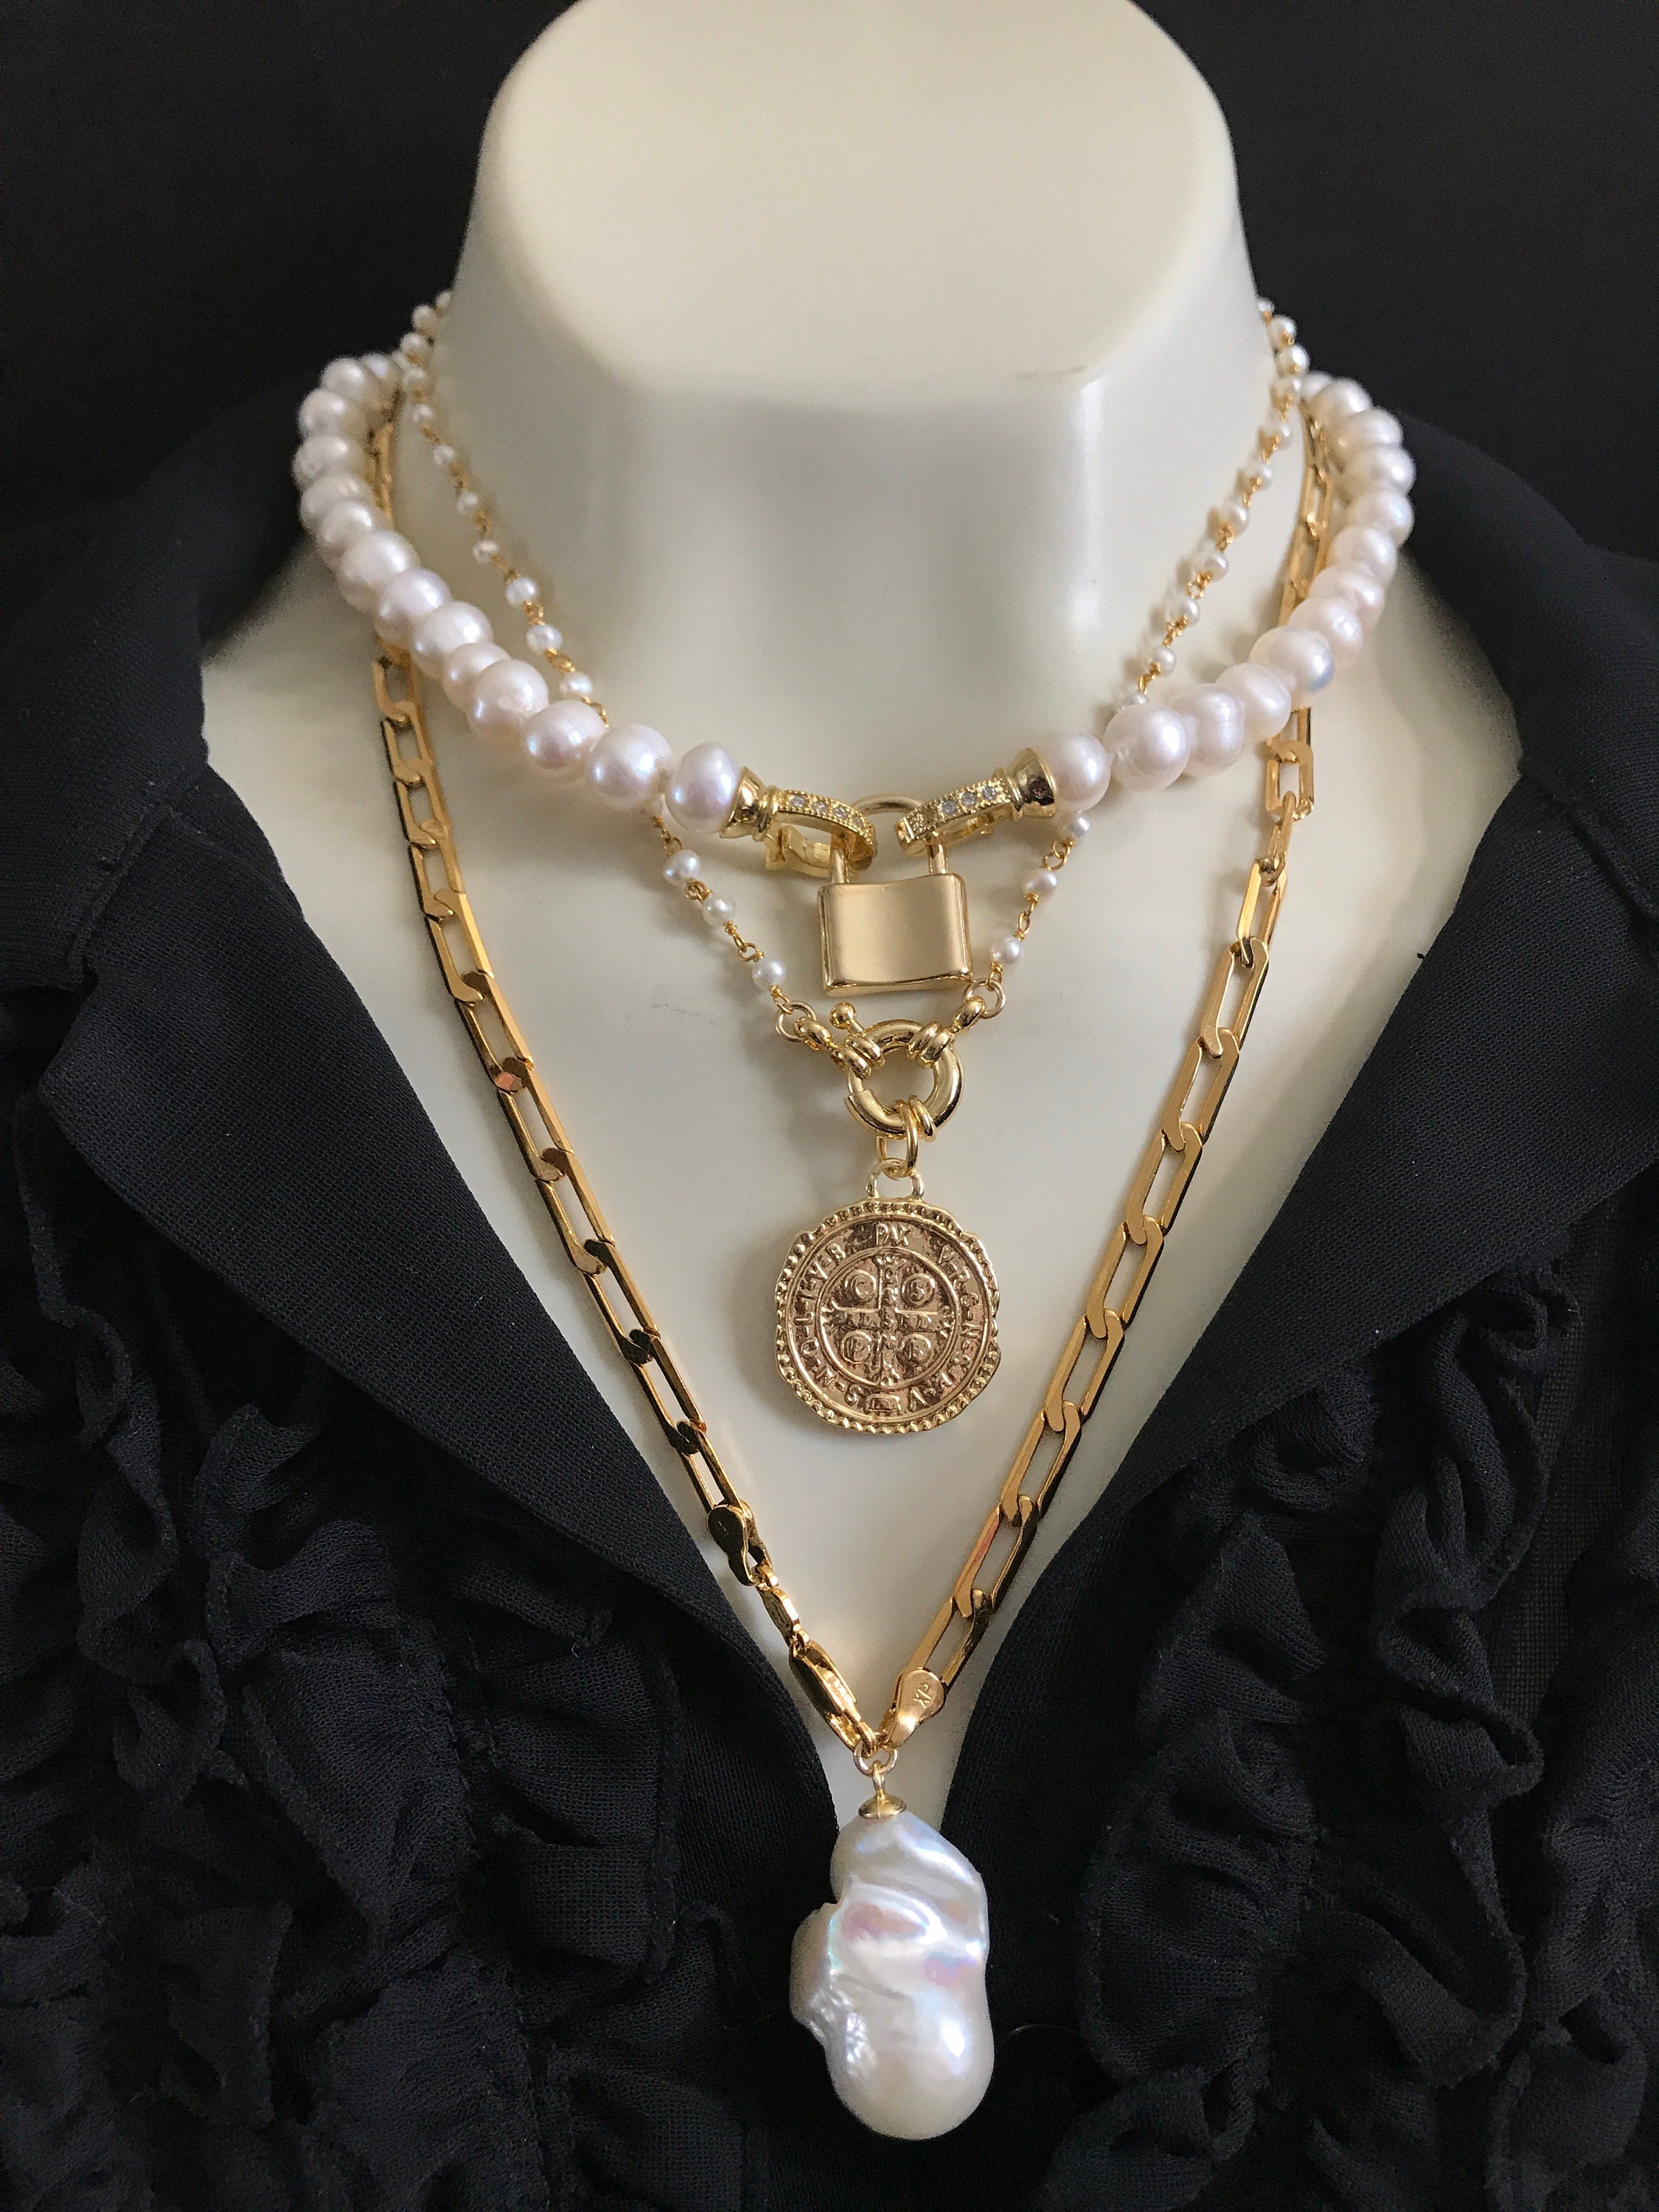 CHANEL, Jewelry, Chanel Pearl Medallion Multistrand Necklace